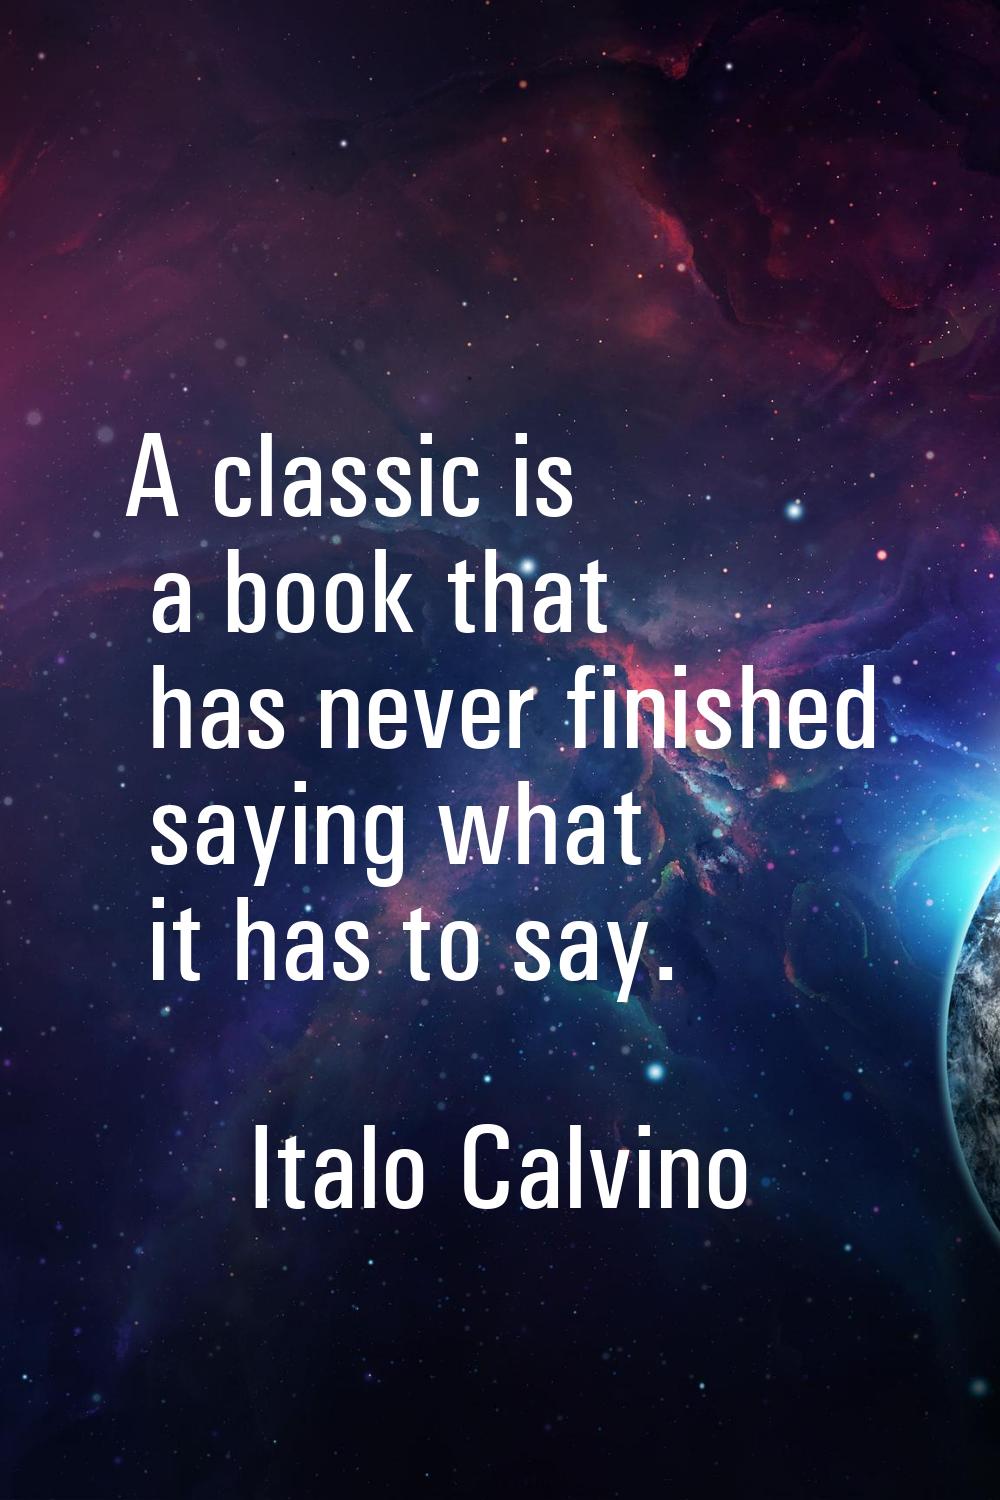 A classic is a book that has never finished saying what it has to say.